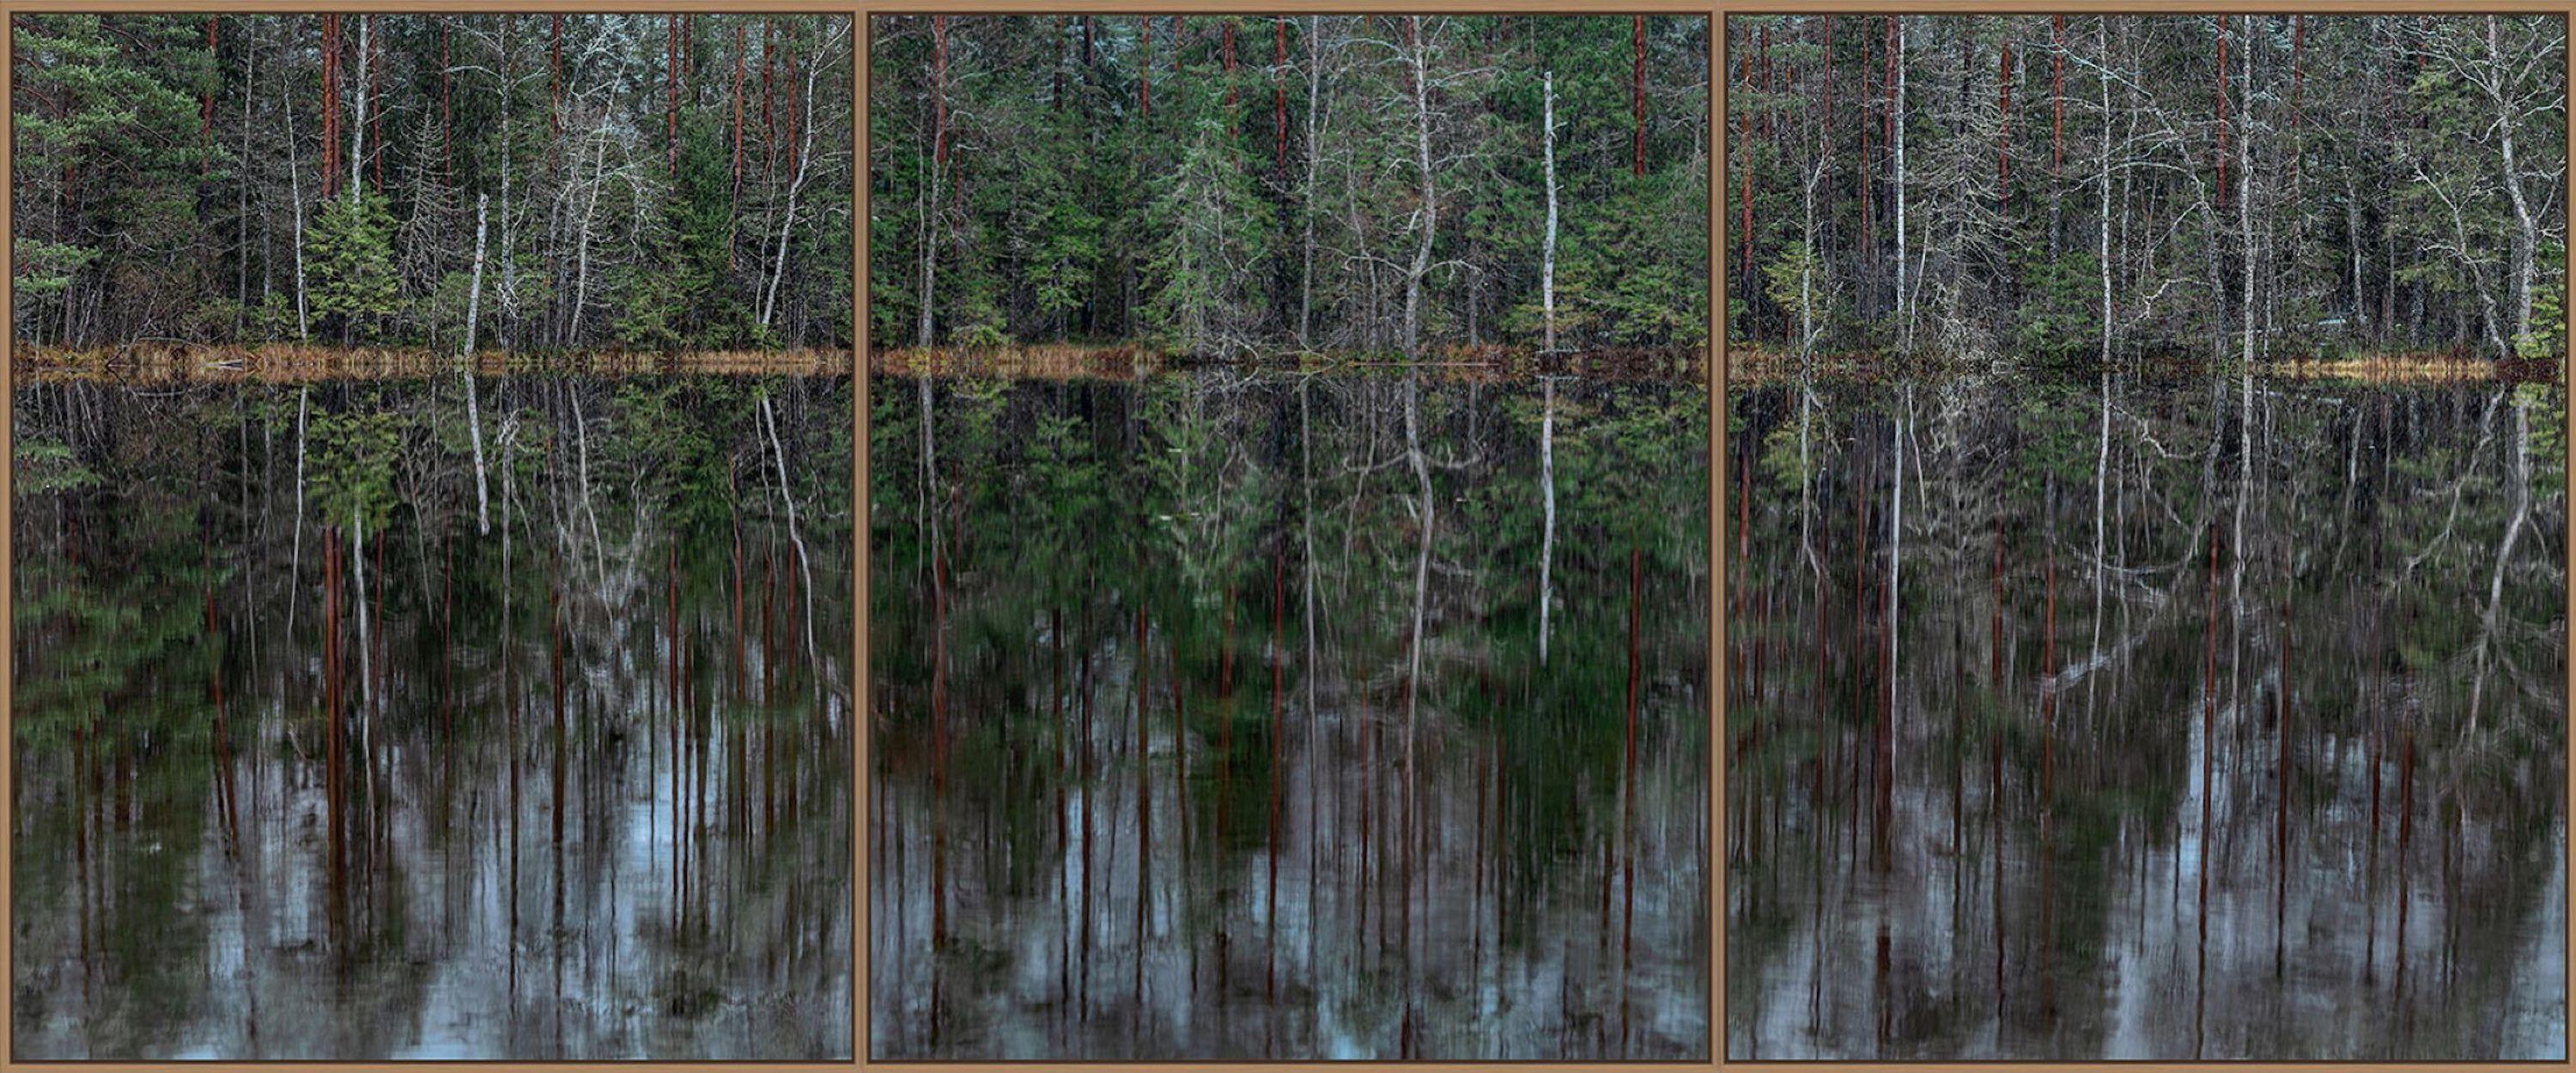 Deep Mirroring Forest 013 is a limited-edition photograph by German contemporary artist Bernhard Lang. 

This photograph is sold unframed as a print only. It is available in 5 dimensions:
*40 × 96 cm (15.7 × 37.8 in), edition of 5 copies
*60 × 144